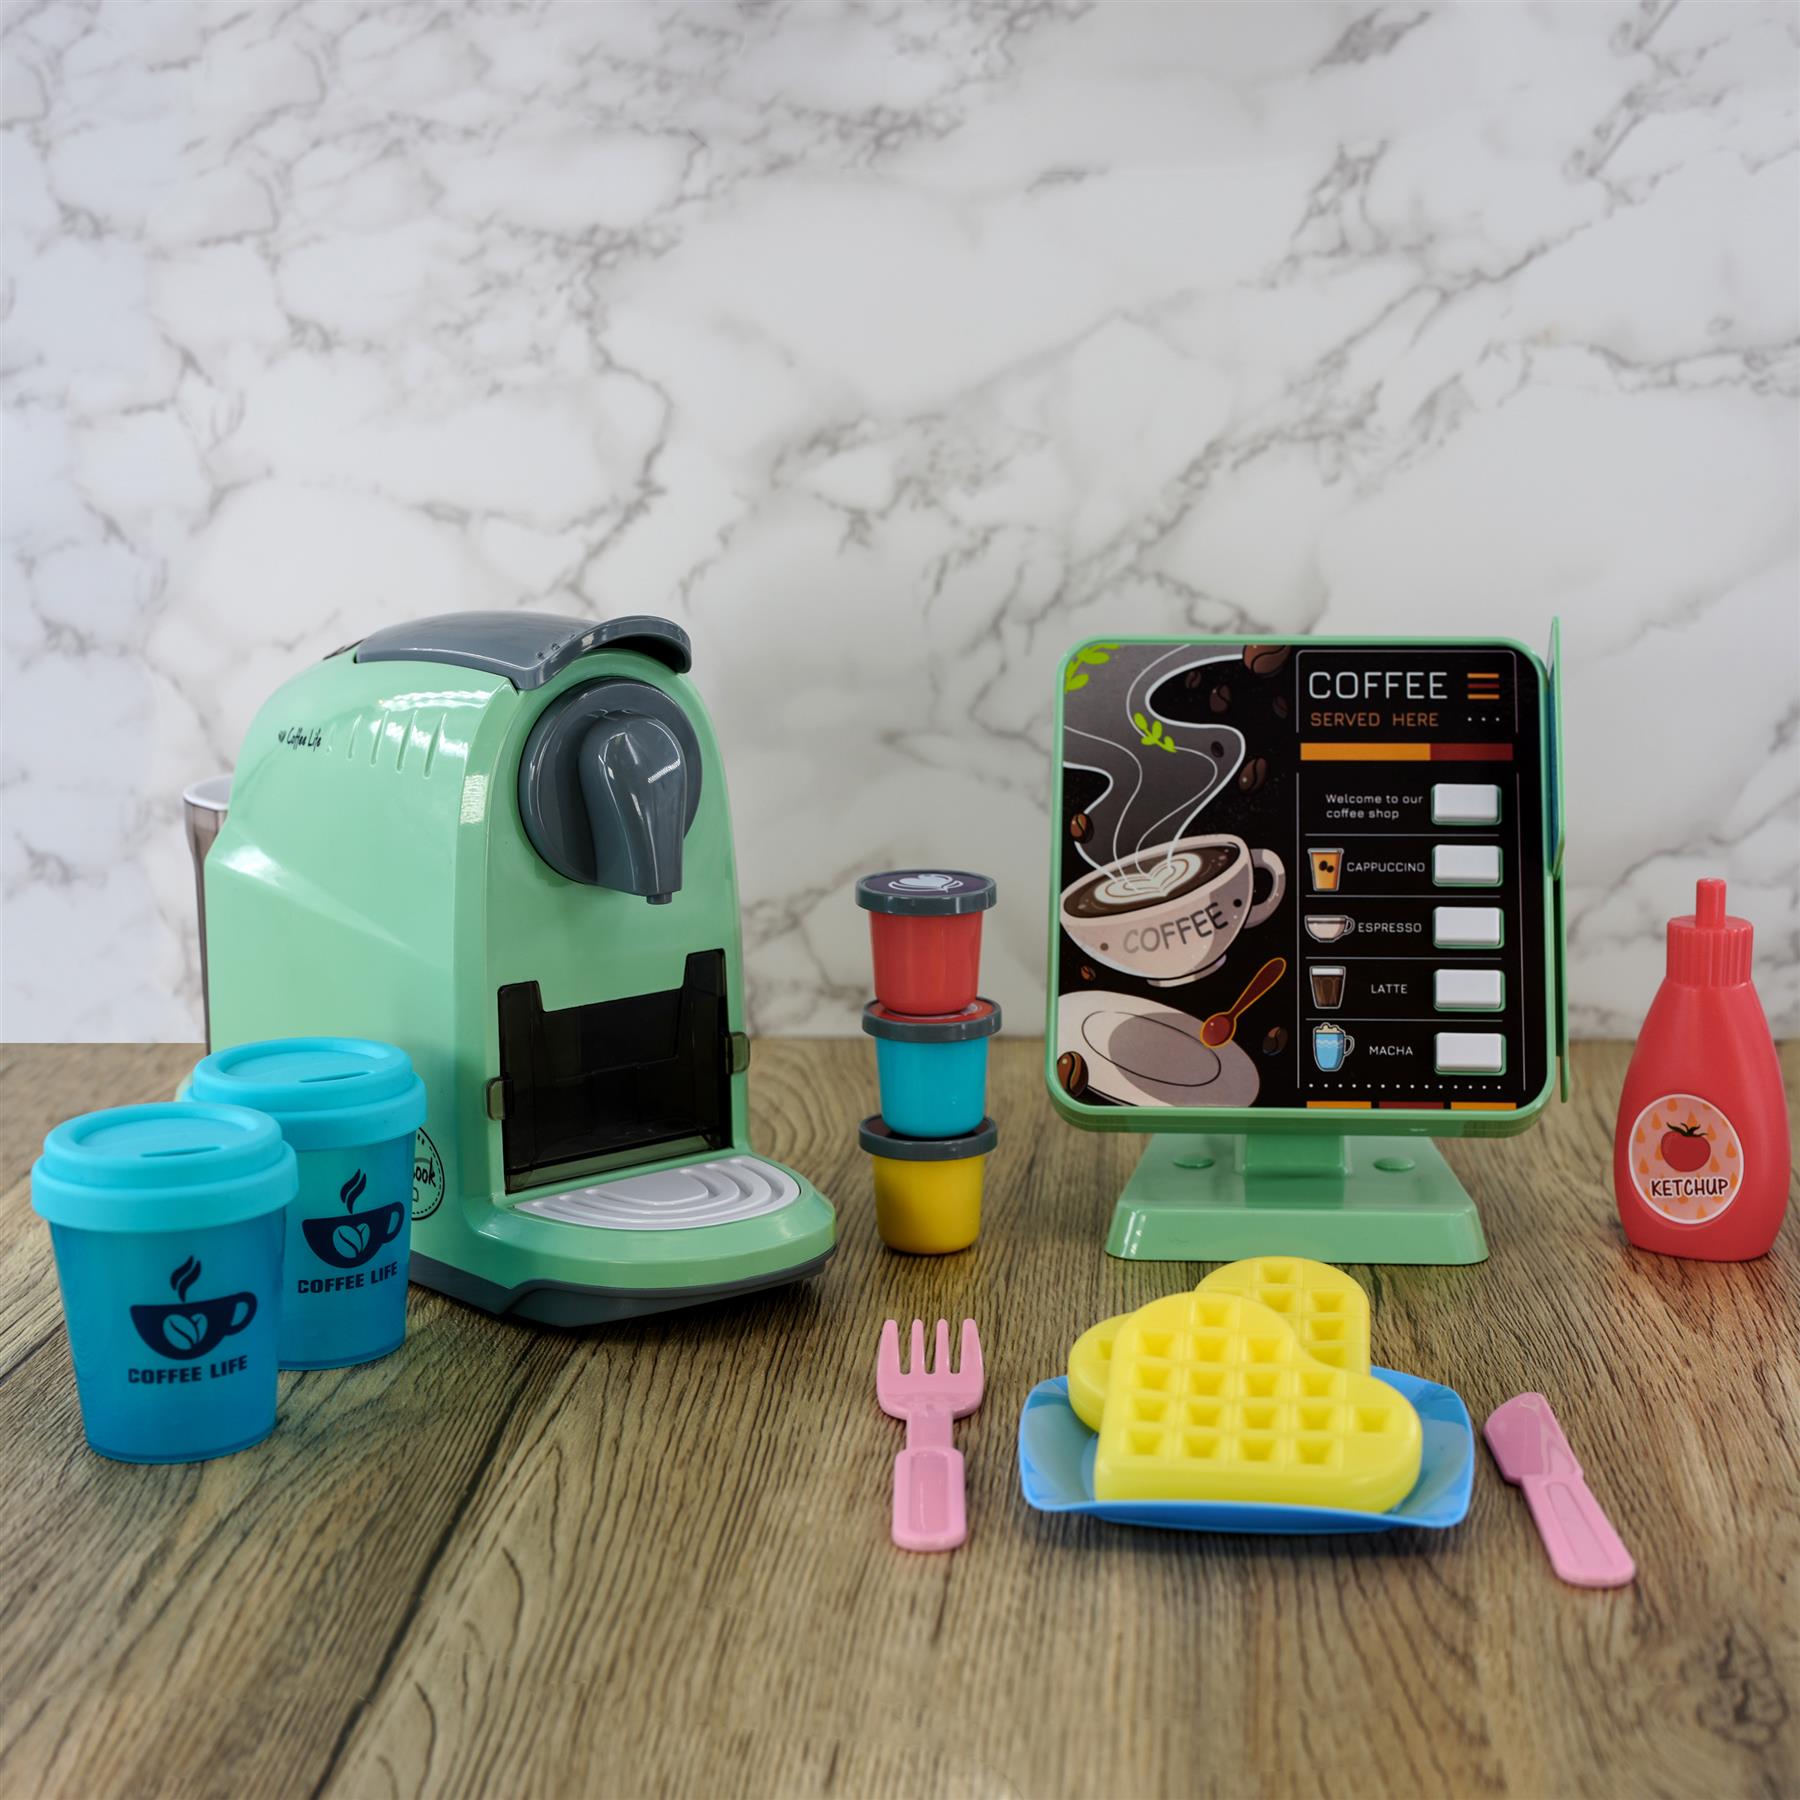 Kids Coffee Maker Machine Toy Kitchen Role Play Set with Cash Register Play Food by The Magic Toy Shop - The Magic Toy Shop